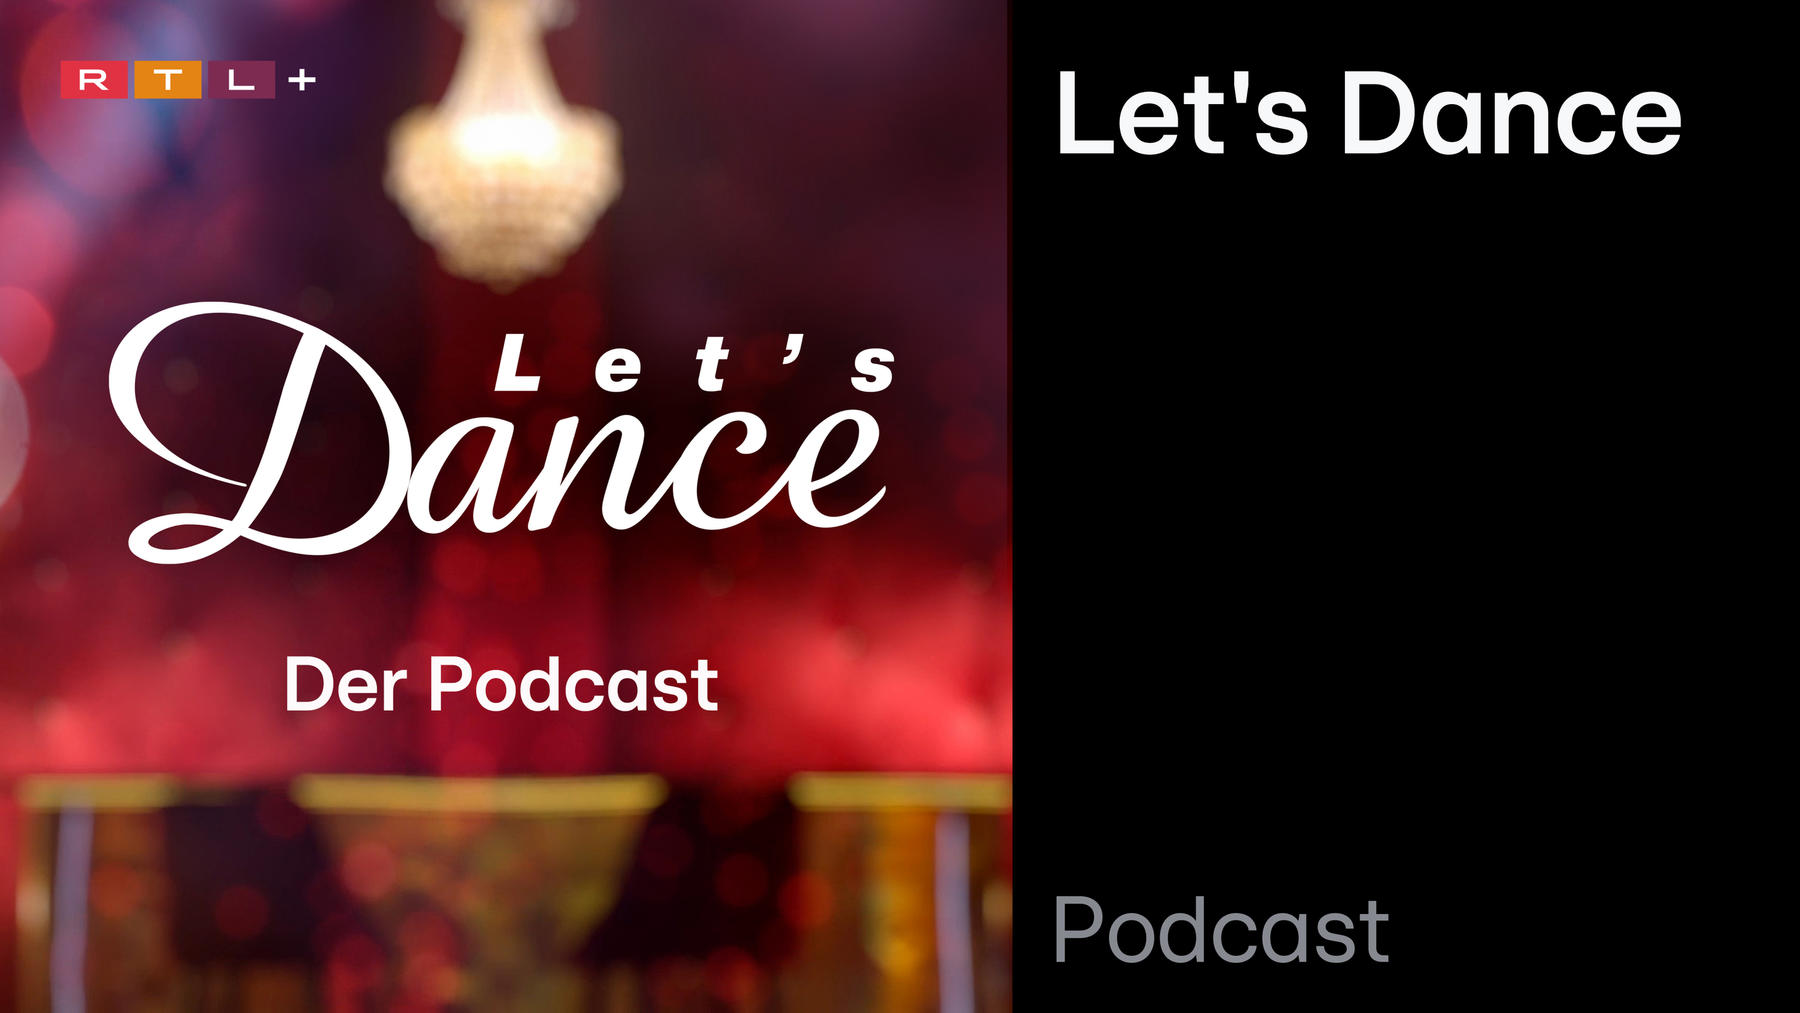 Podcast: Let's Dance